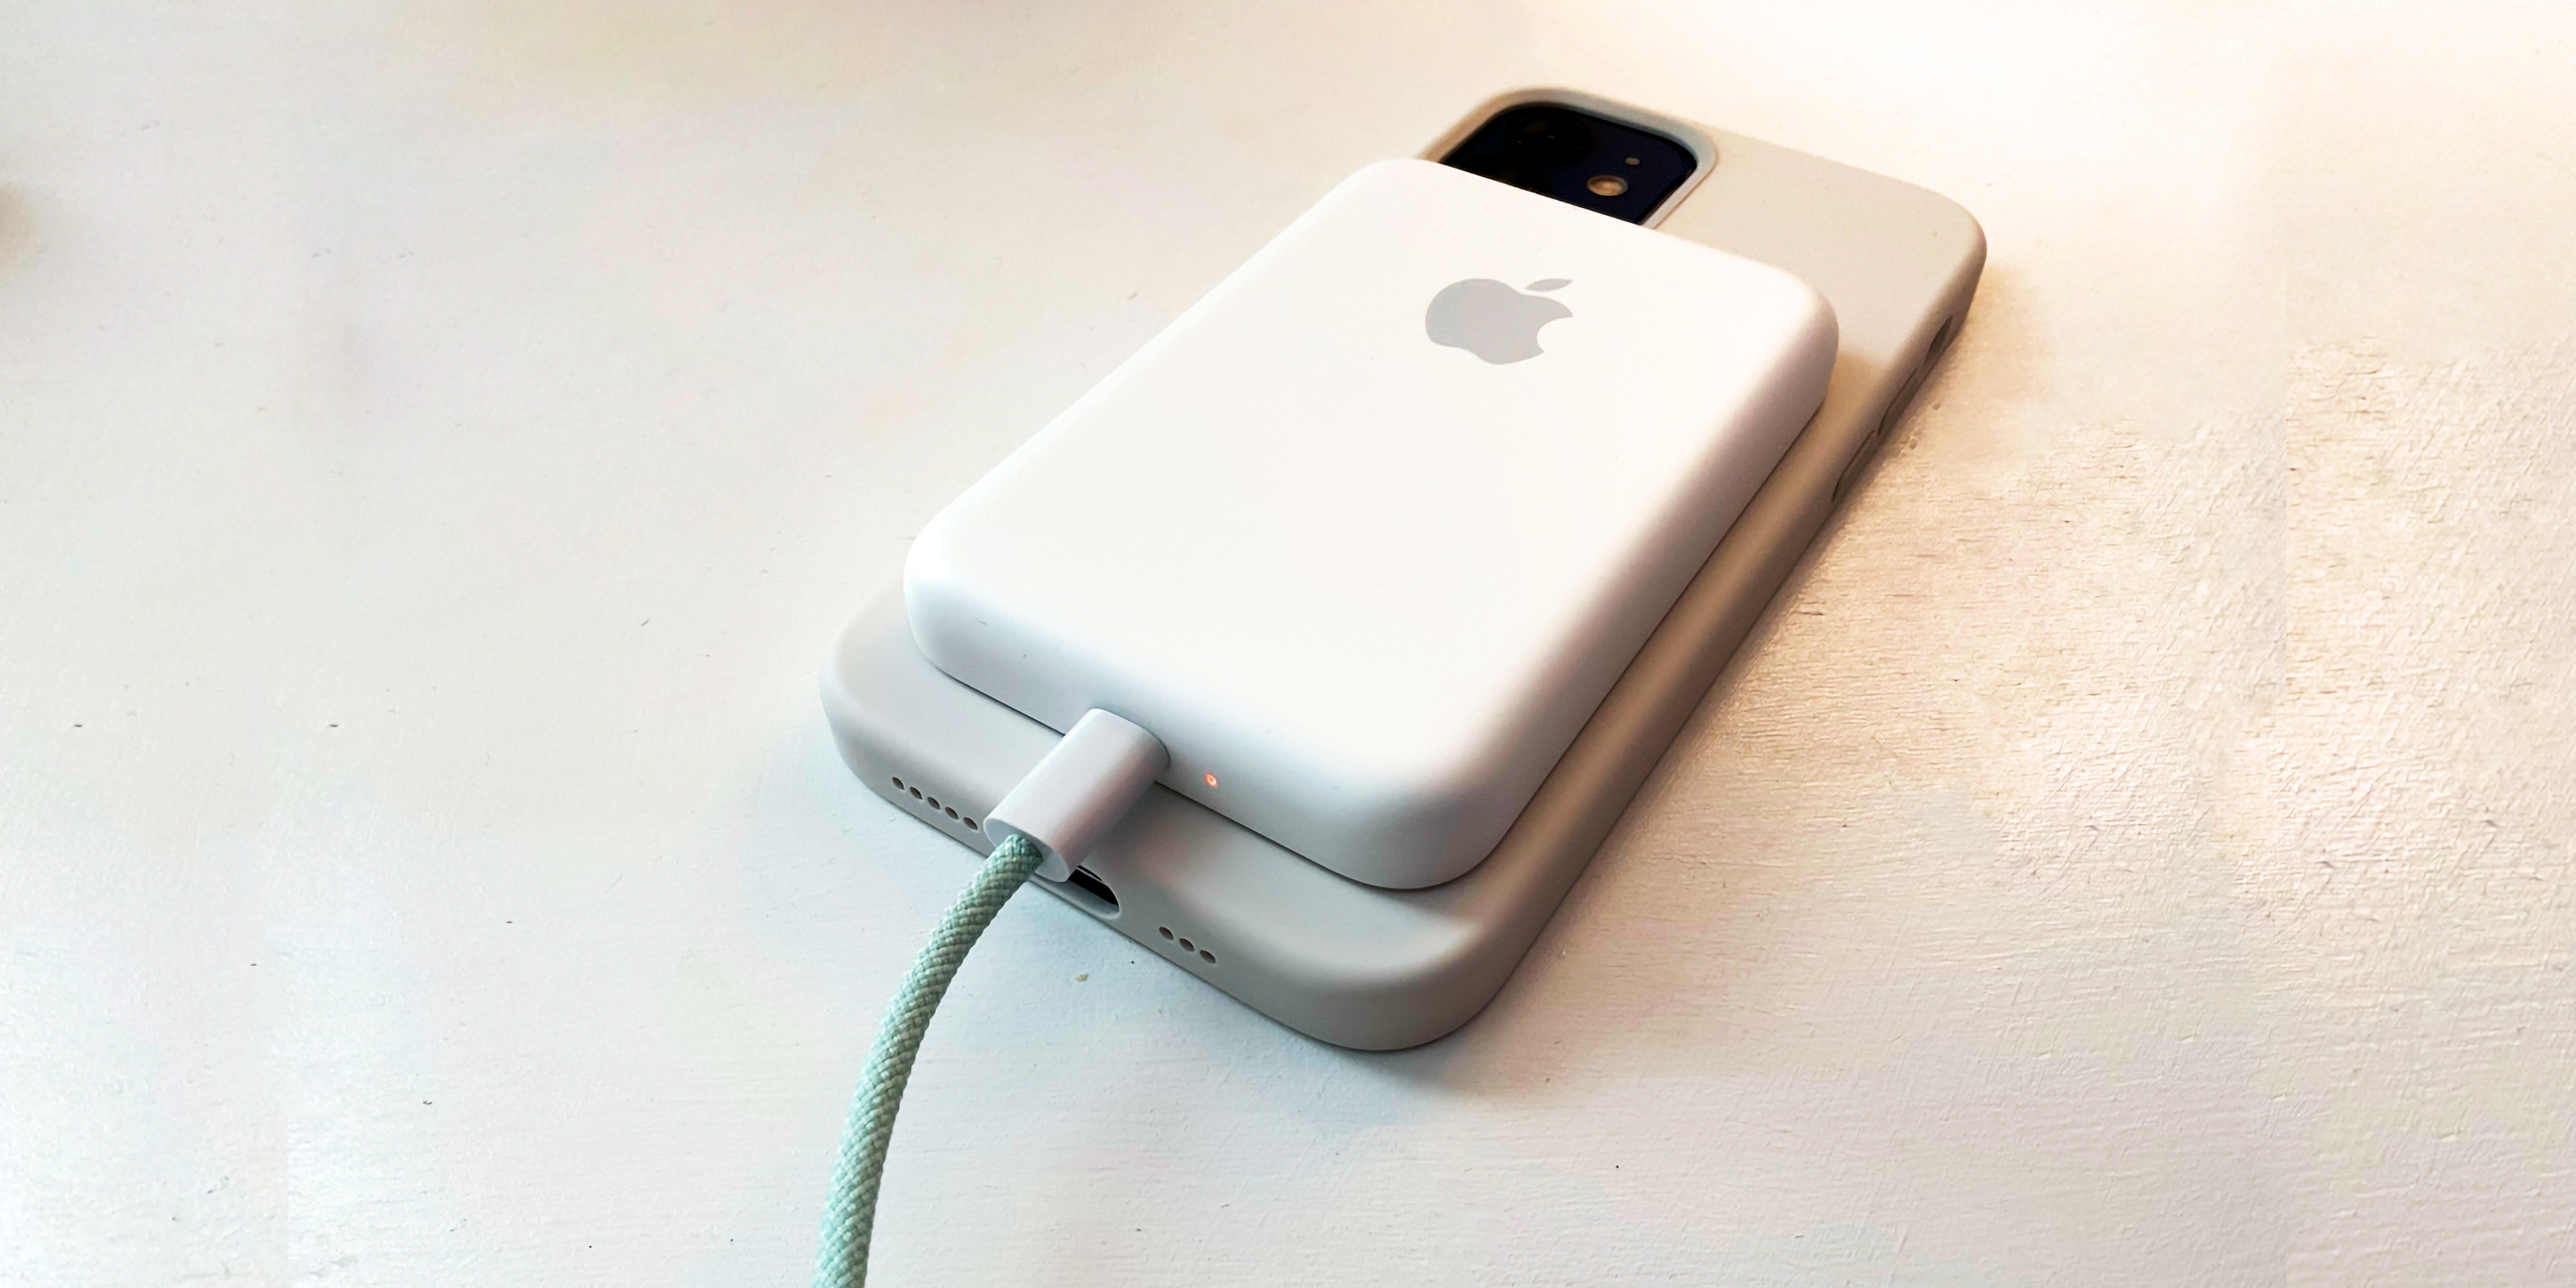 Apple reportedly working on a MagSafe battery pack for iPhone 12 - CNET